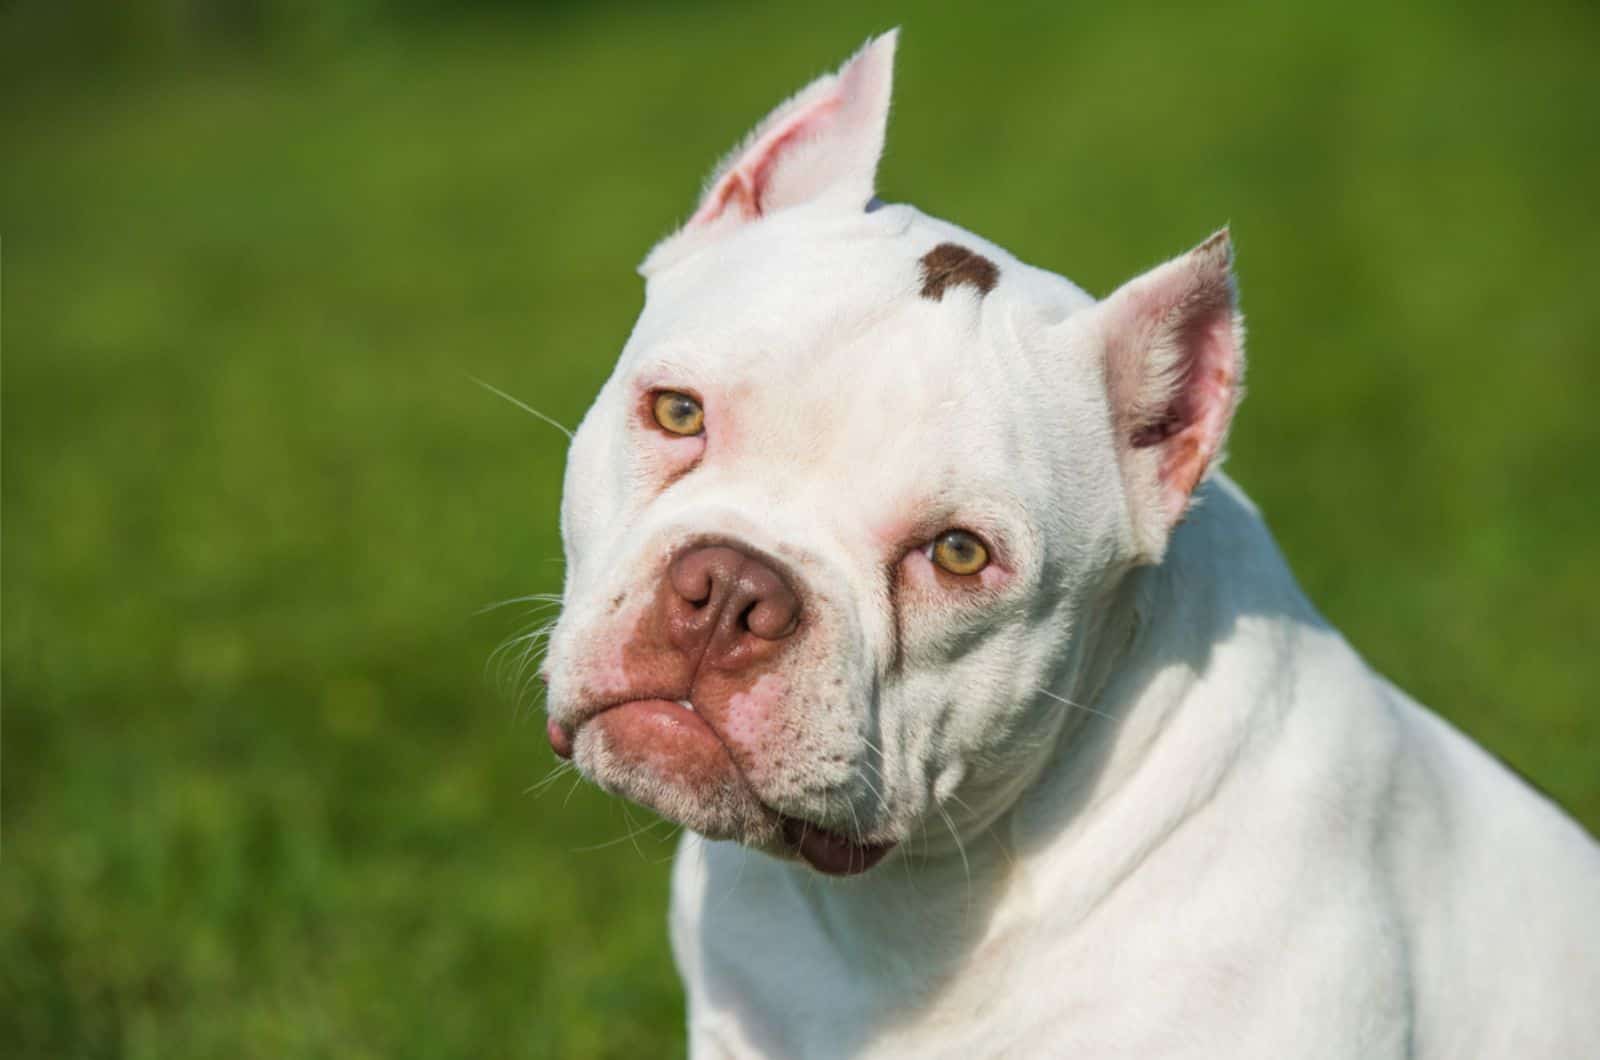 White American Bully puppy dog sitting on green grass